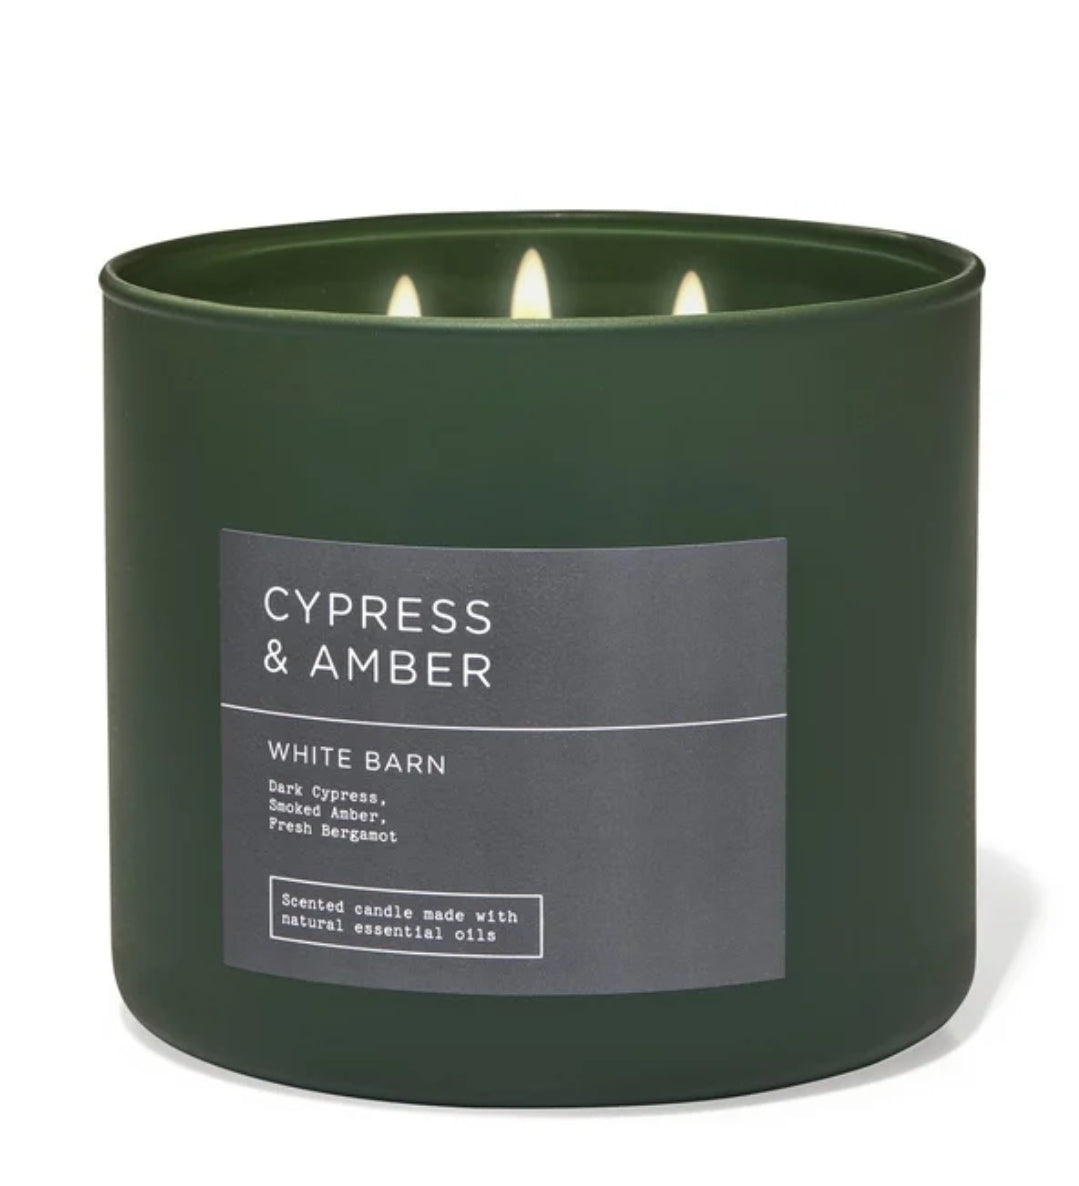 Cypress & Amber Scented Candle